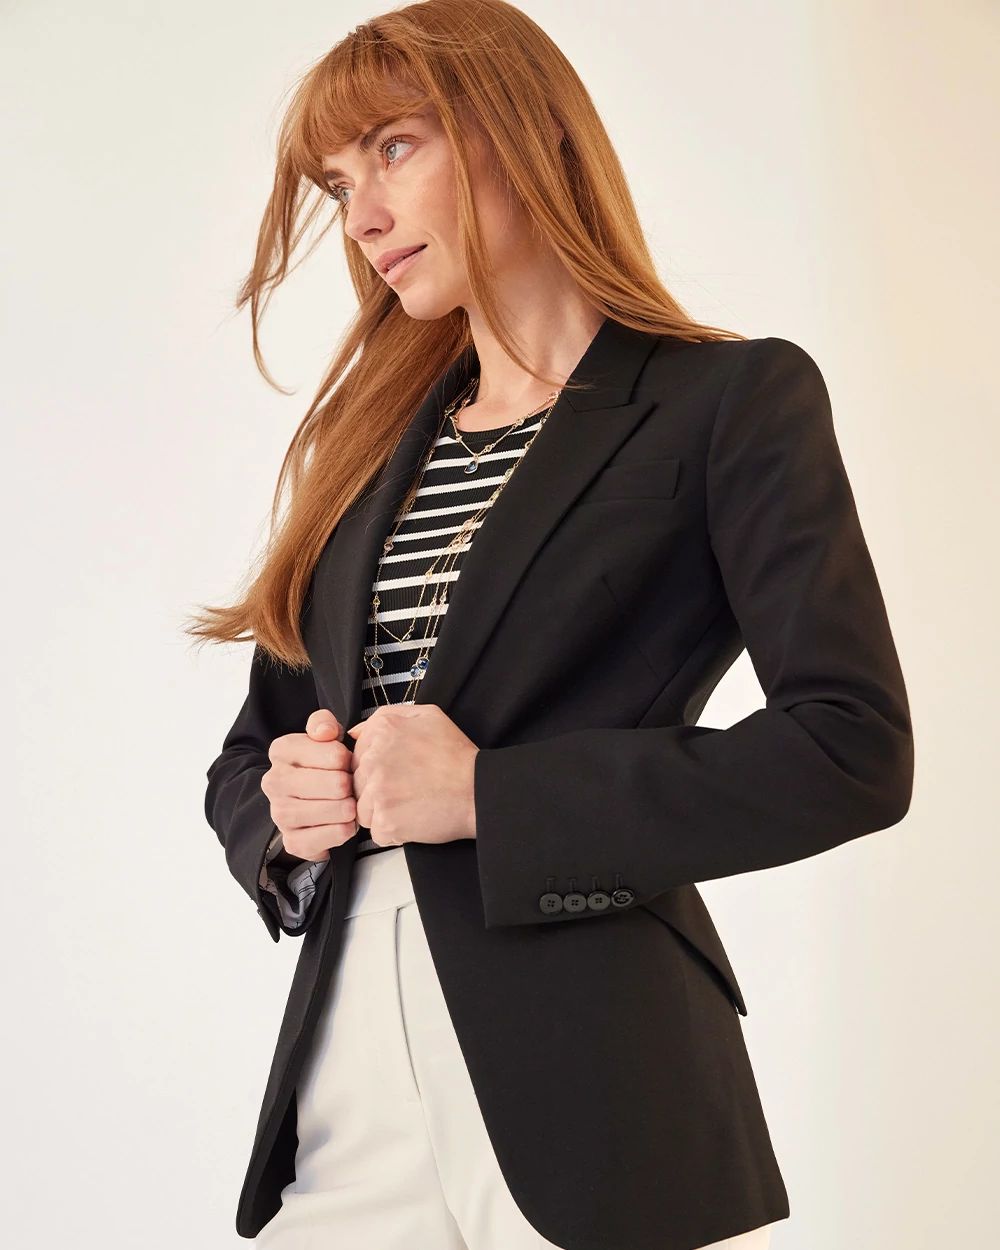 WHBM® Editor Blazer click to view larger image.